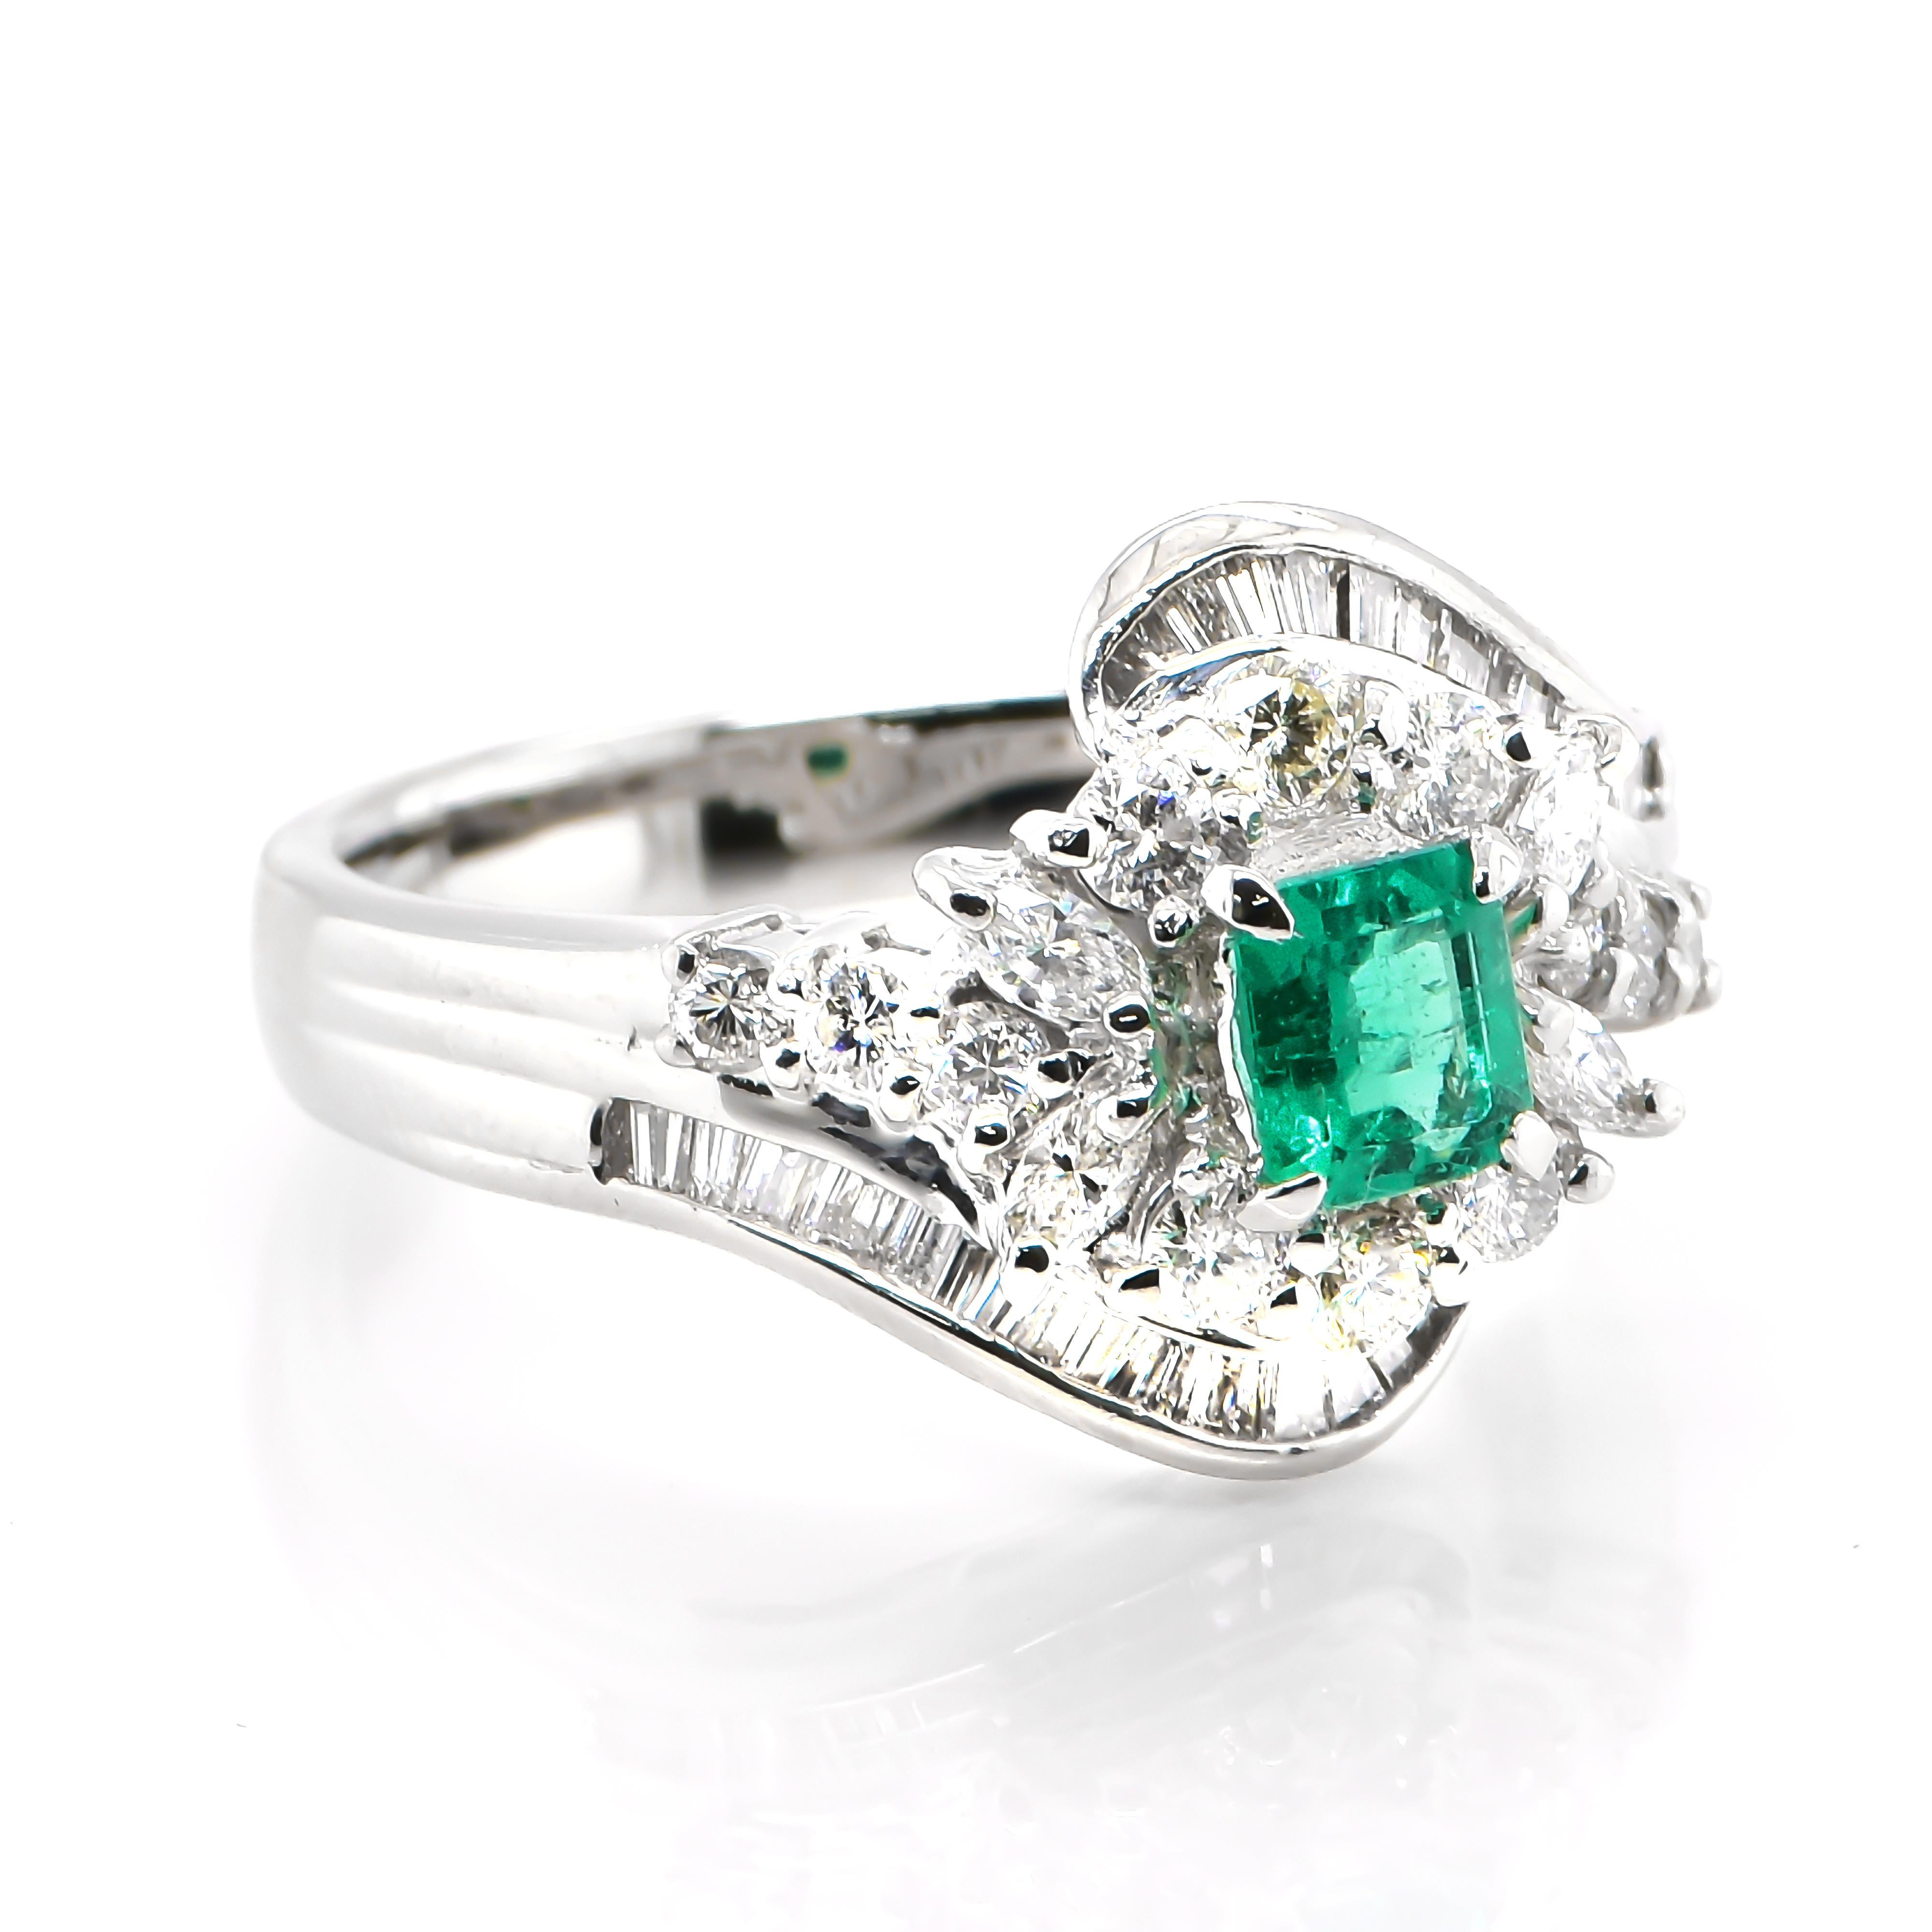 A stunning ring featuring a 0.42 Carat Natural Emerald and 1.19 Carats of Diamond Accents set in Platinum. People have admired emerald’s green for thousands of years. Emeralds have always been associated with the lushest landscapes and the richest